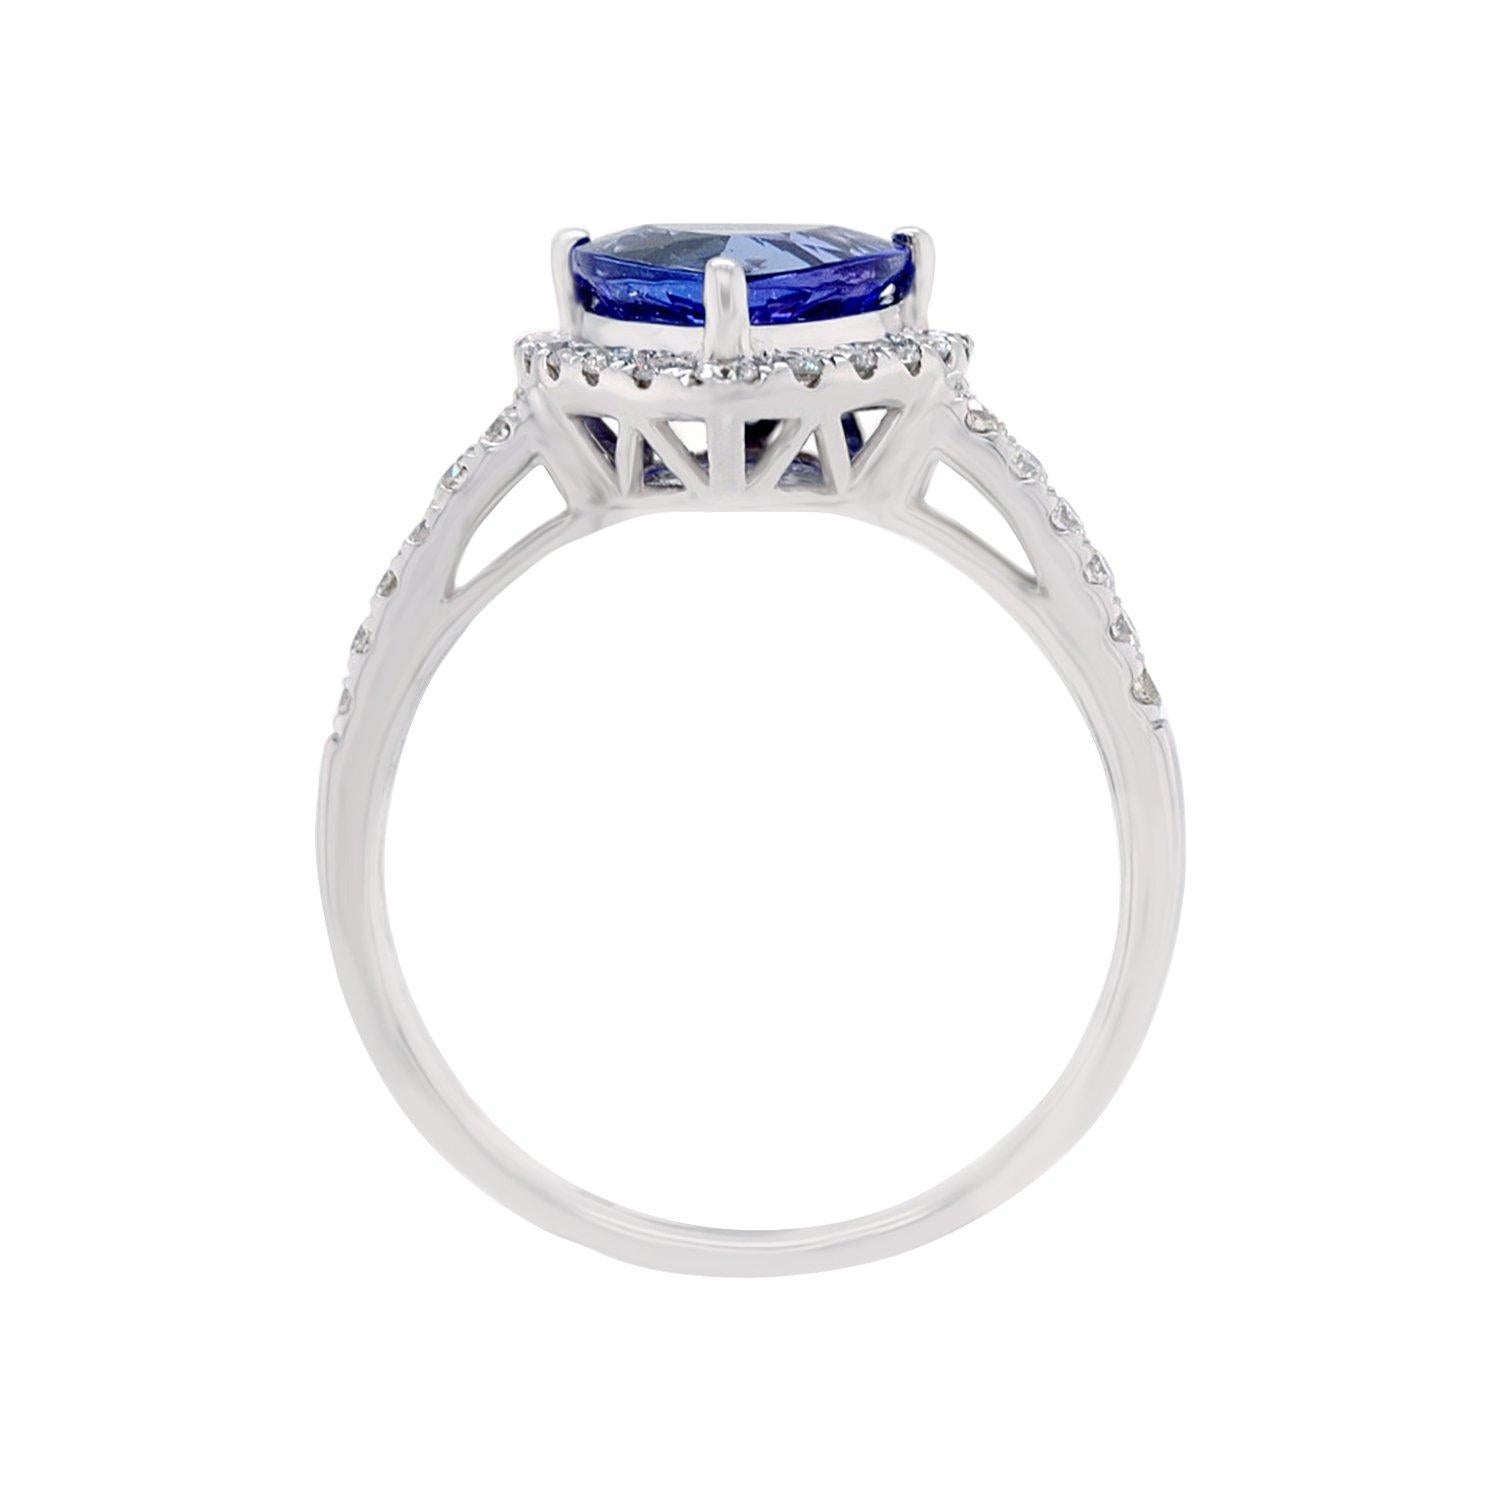 Trillion 2.16ct Tanzanite Ring with 0.38tct Diamond Halo in 14k White Gold In New Condition For Sale In New York, NY